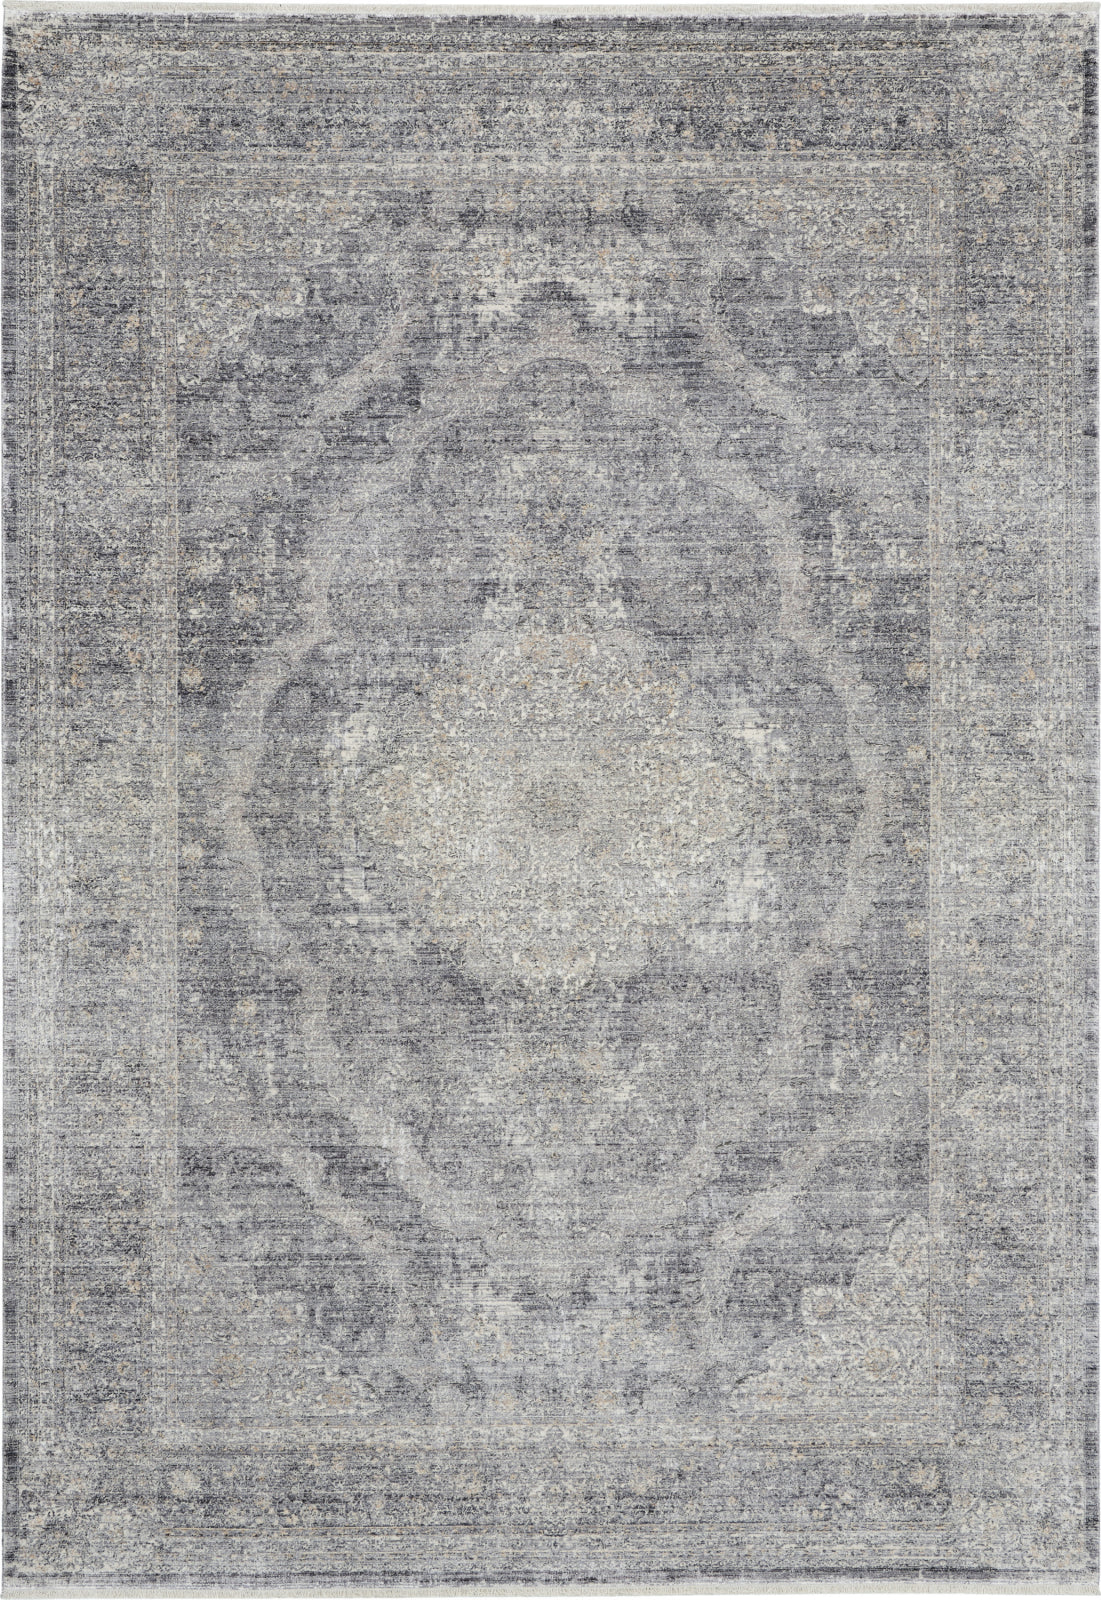 Starry Nights STN05 Charcoal/Cream Area Rug by Nourison Main Image